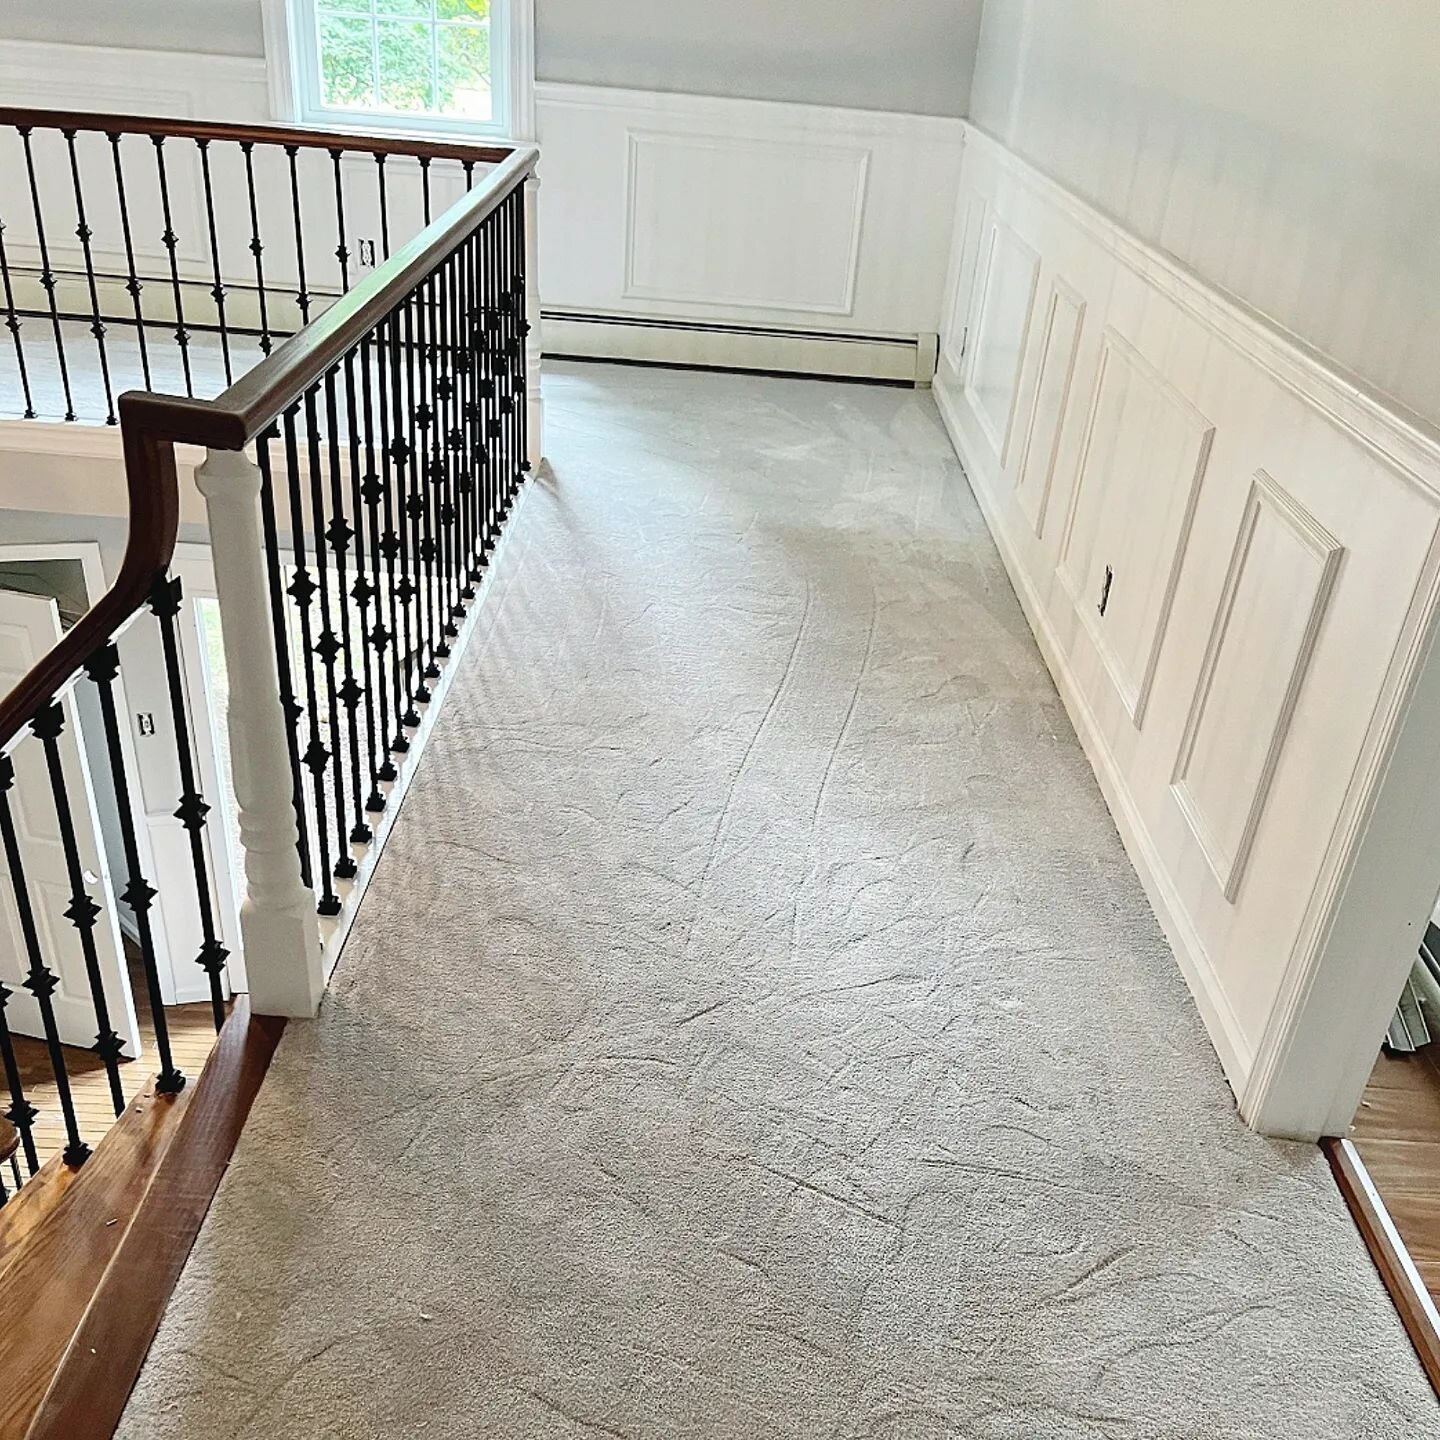 New carpet made all the difference in this space ✨️ Swipe to see for yourself 👉

#flooring #flooringexperts #flooringideas #carpet #carpetinstallation #newfloors #homedesign #homeimprovement #home #kreerconstruction #grayinterior #carpetinspo #disco